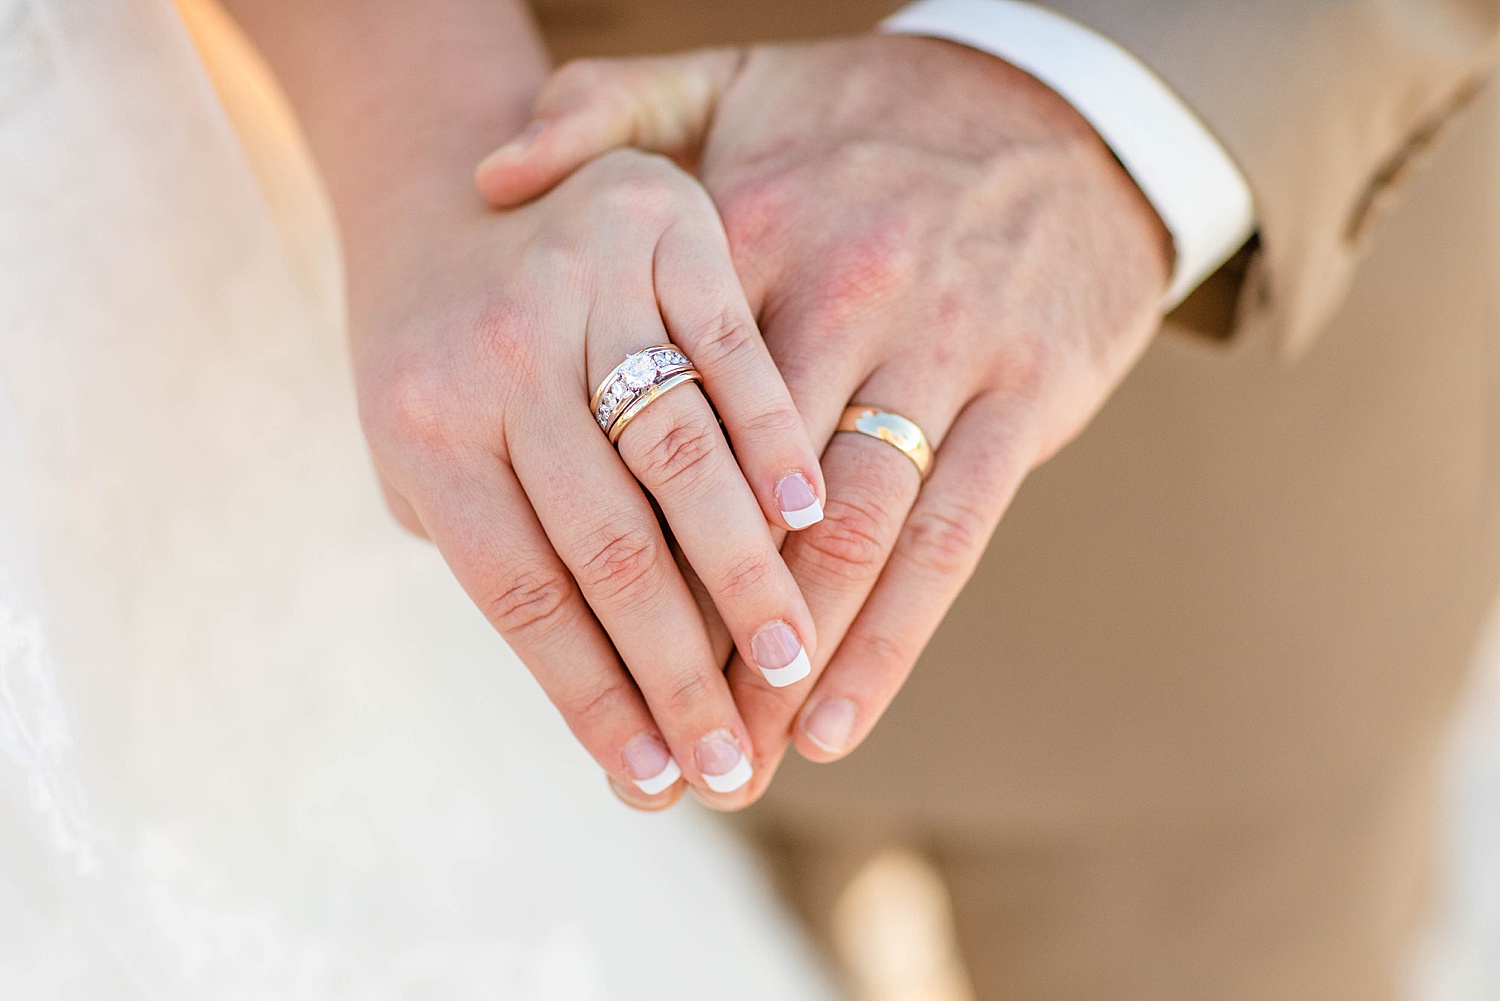 husband and wife hold hands and show off wedding bands